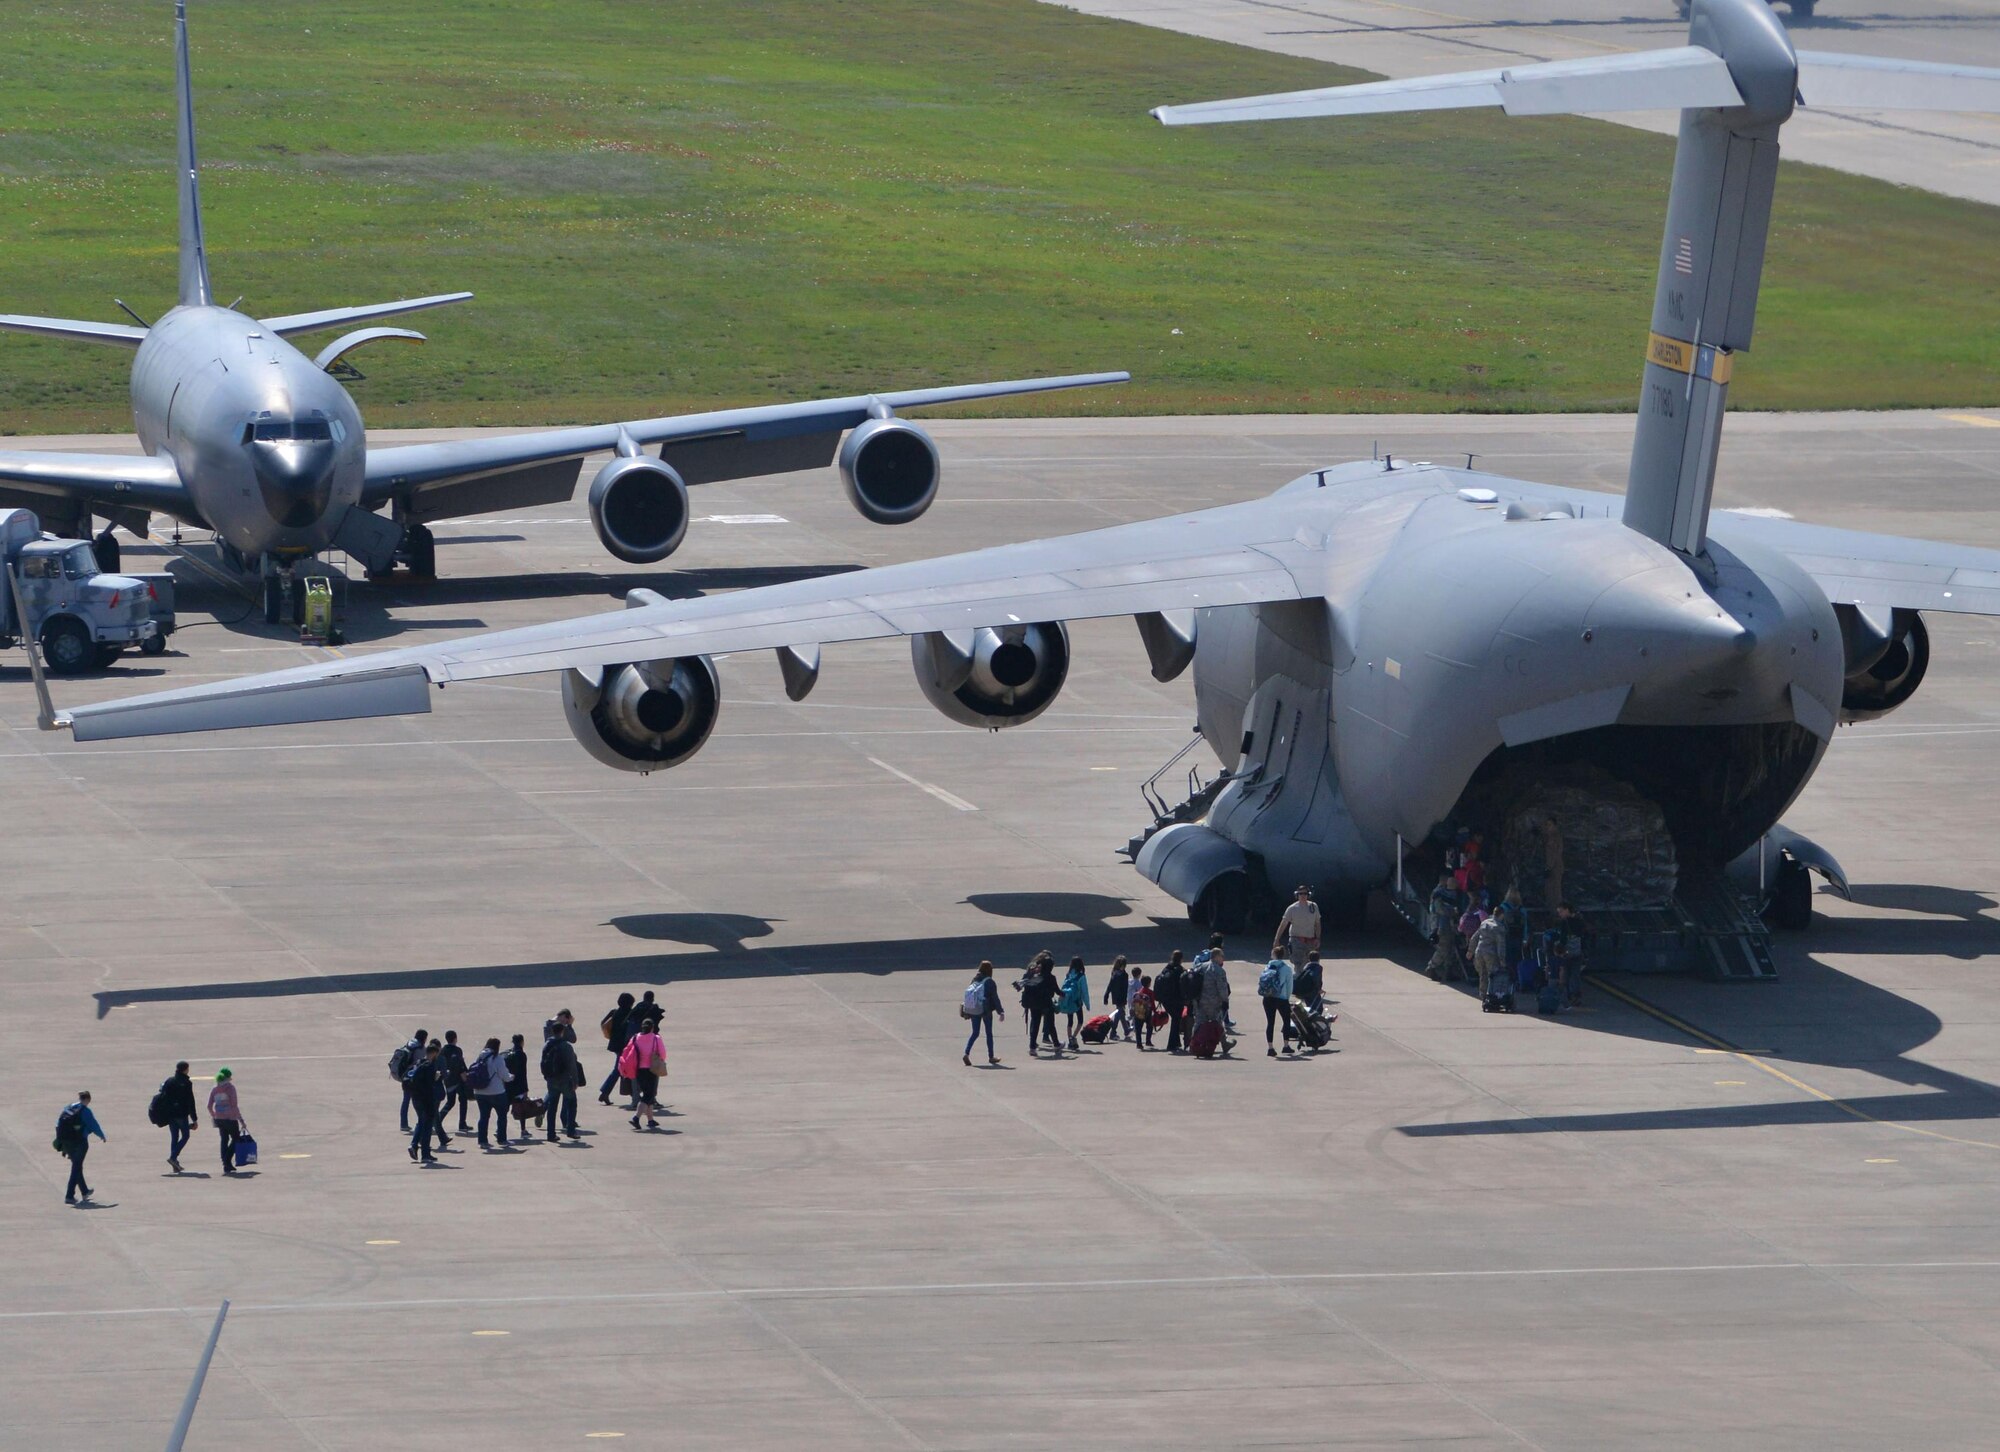 Families of U.S. Airmen and Defense Department civilians board a C-17 Globemaster III during an ordered departure March 30, 2016, at Incirlik Air Base, Turkey. On March 29, 2016, the secretary of defense, in coordination with the secretary of state, ordered the departure of all DOD dependents assigned to Incirlik AB. (U.S. Air Force photo/Senior Airman John Nieves Camacho)